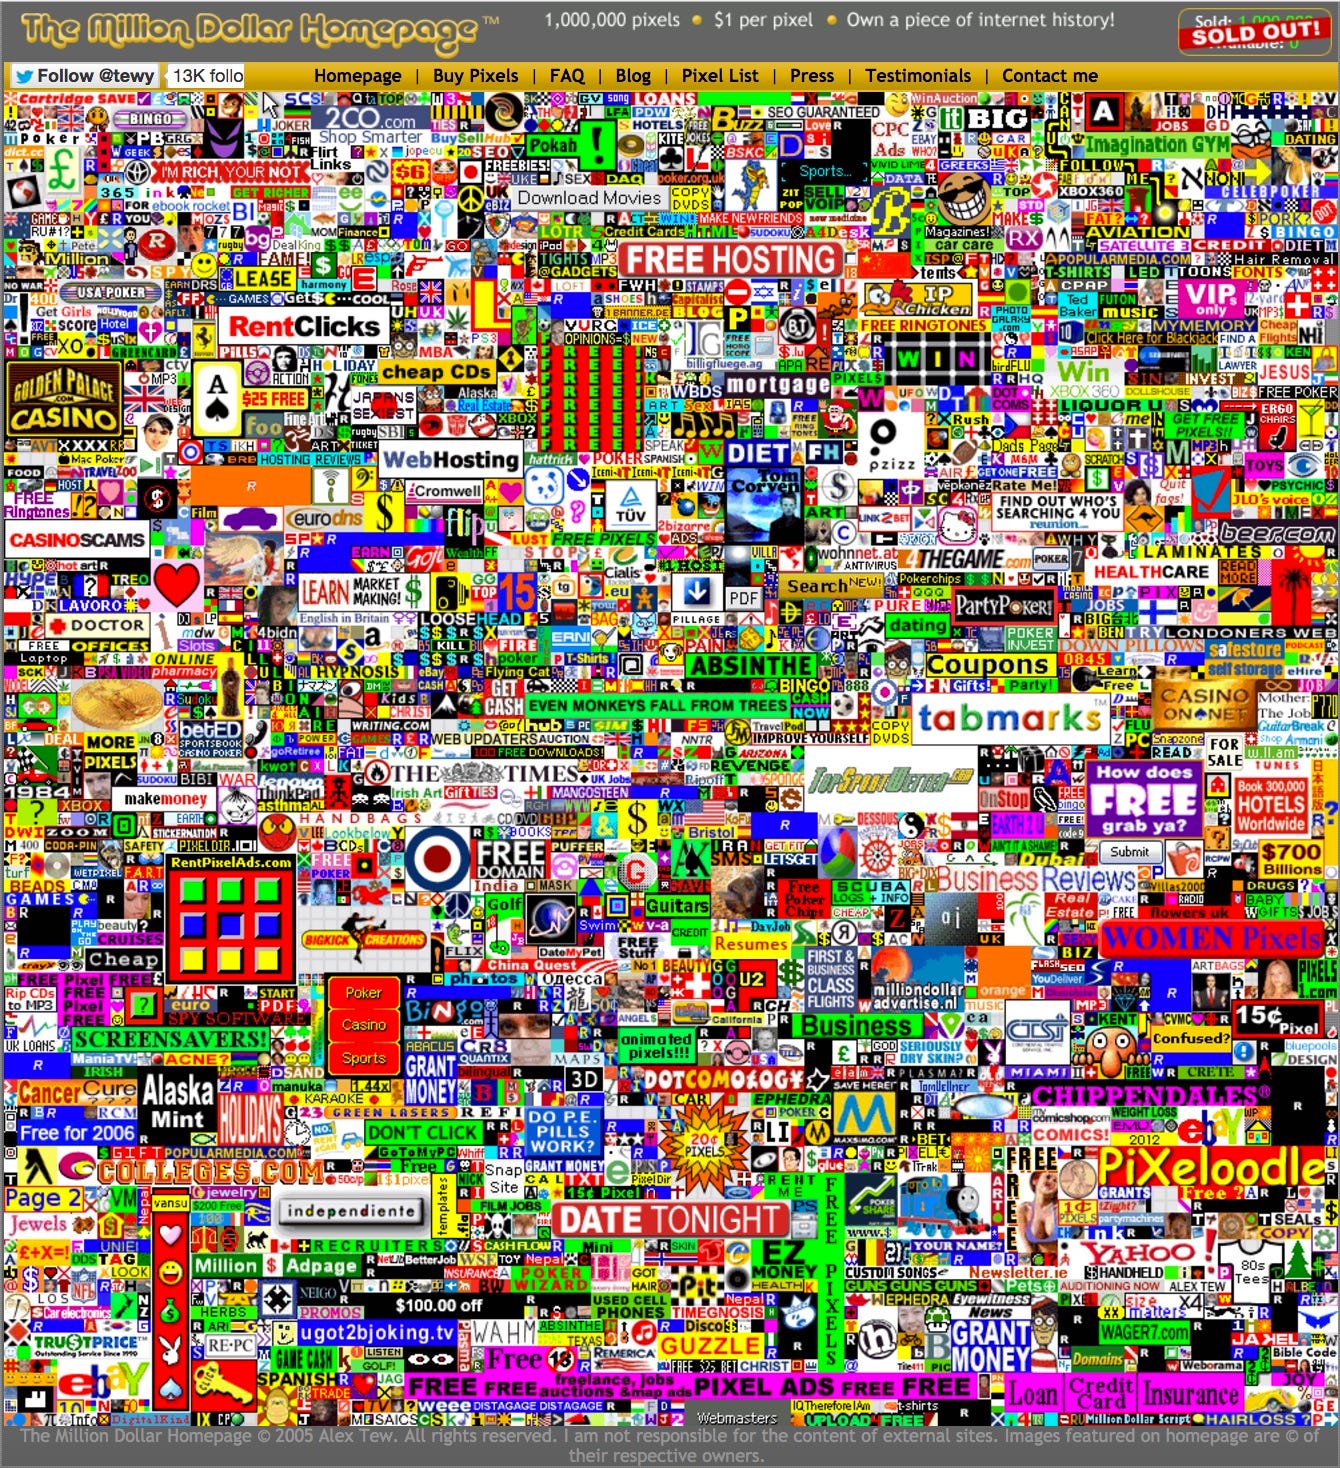 A Million Squandered: The “Million Dollar Homepage” as a Decaying Digital  Artifact | Library Innovation Lab